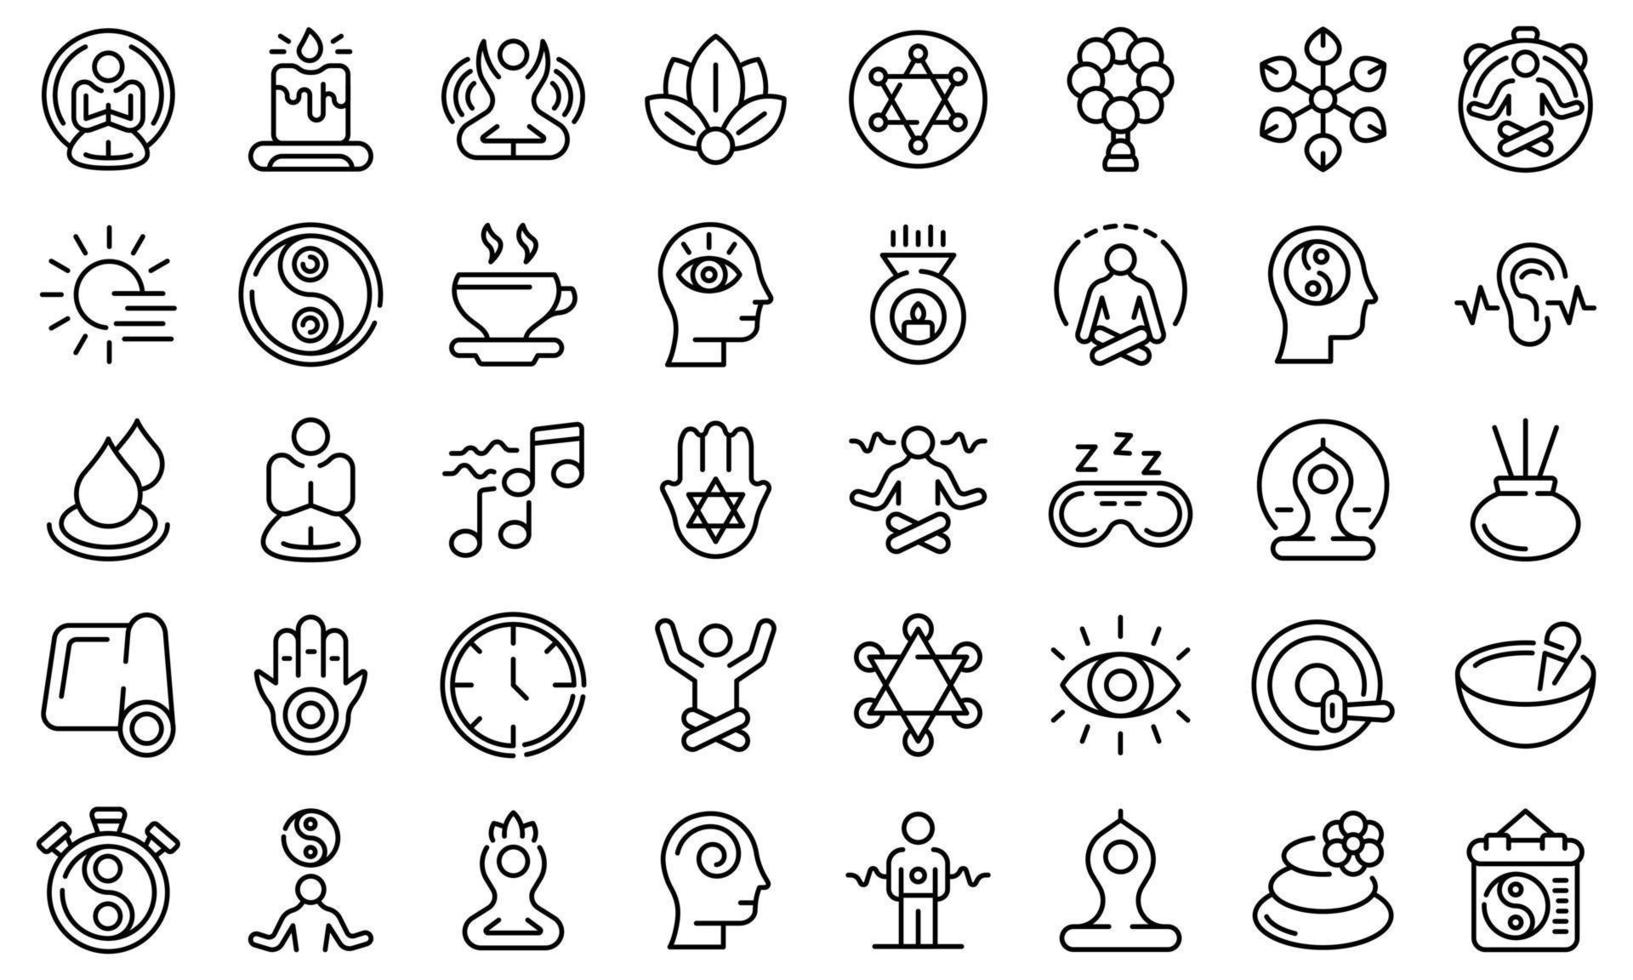 Spiritual practices icons set, outline style vector